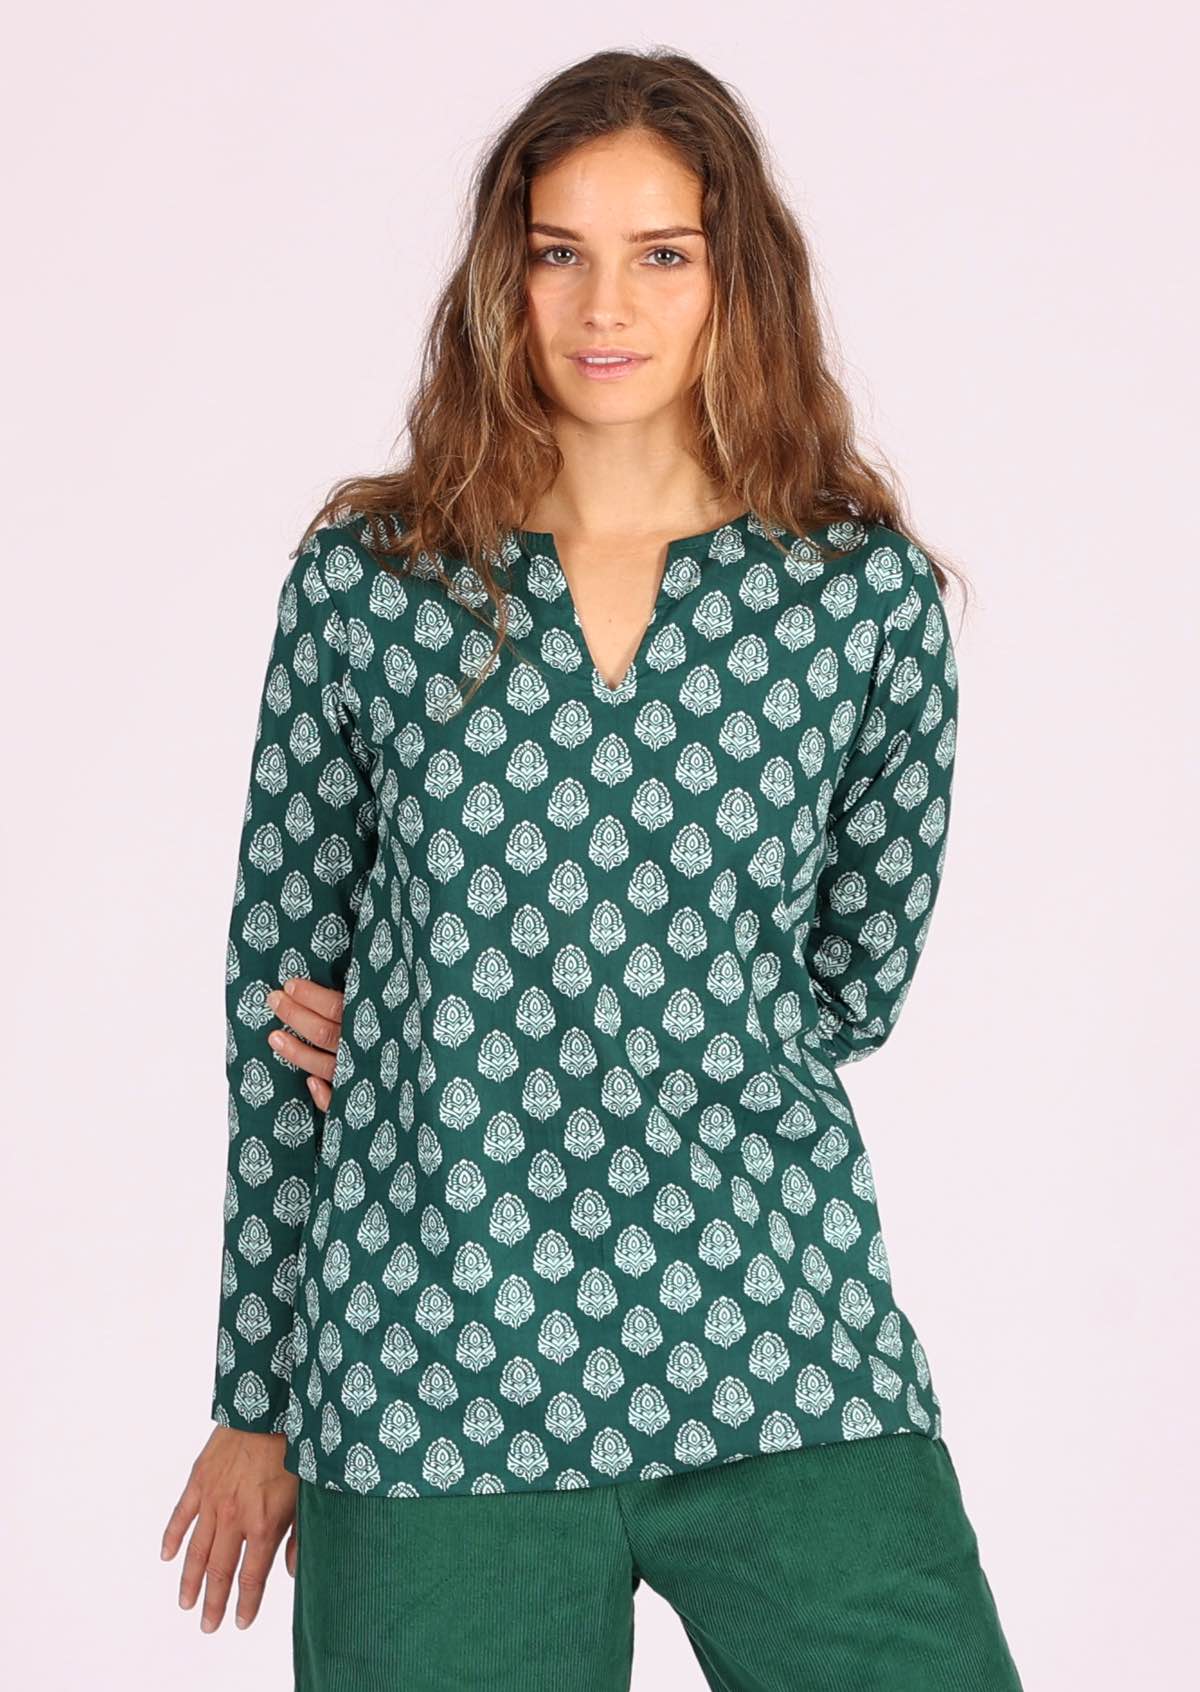 Round neck with V cutout is a stylish feature of this cotton long sleeve top